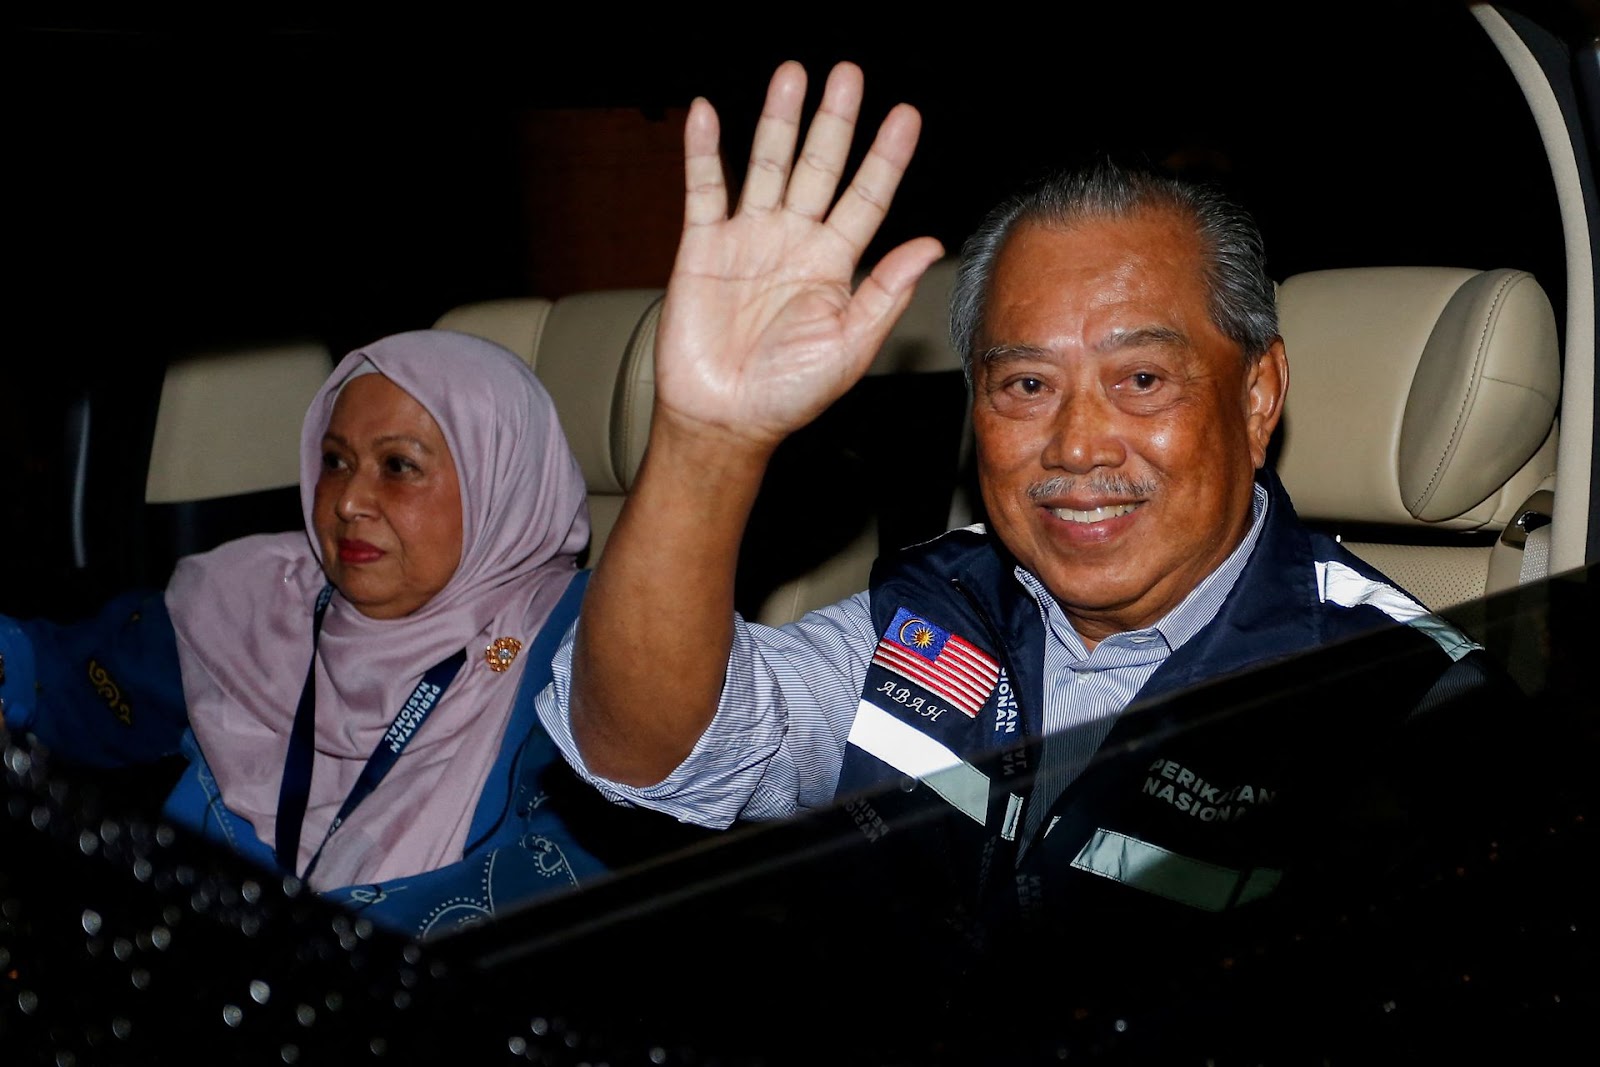 Leaders during election in Malaysia